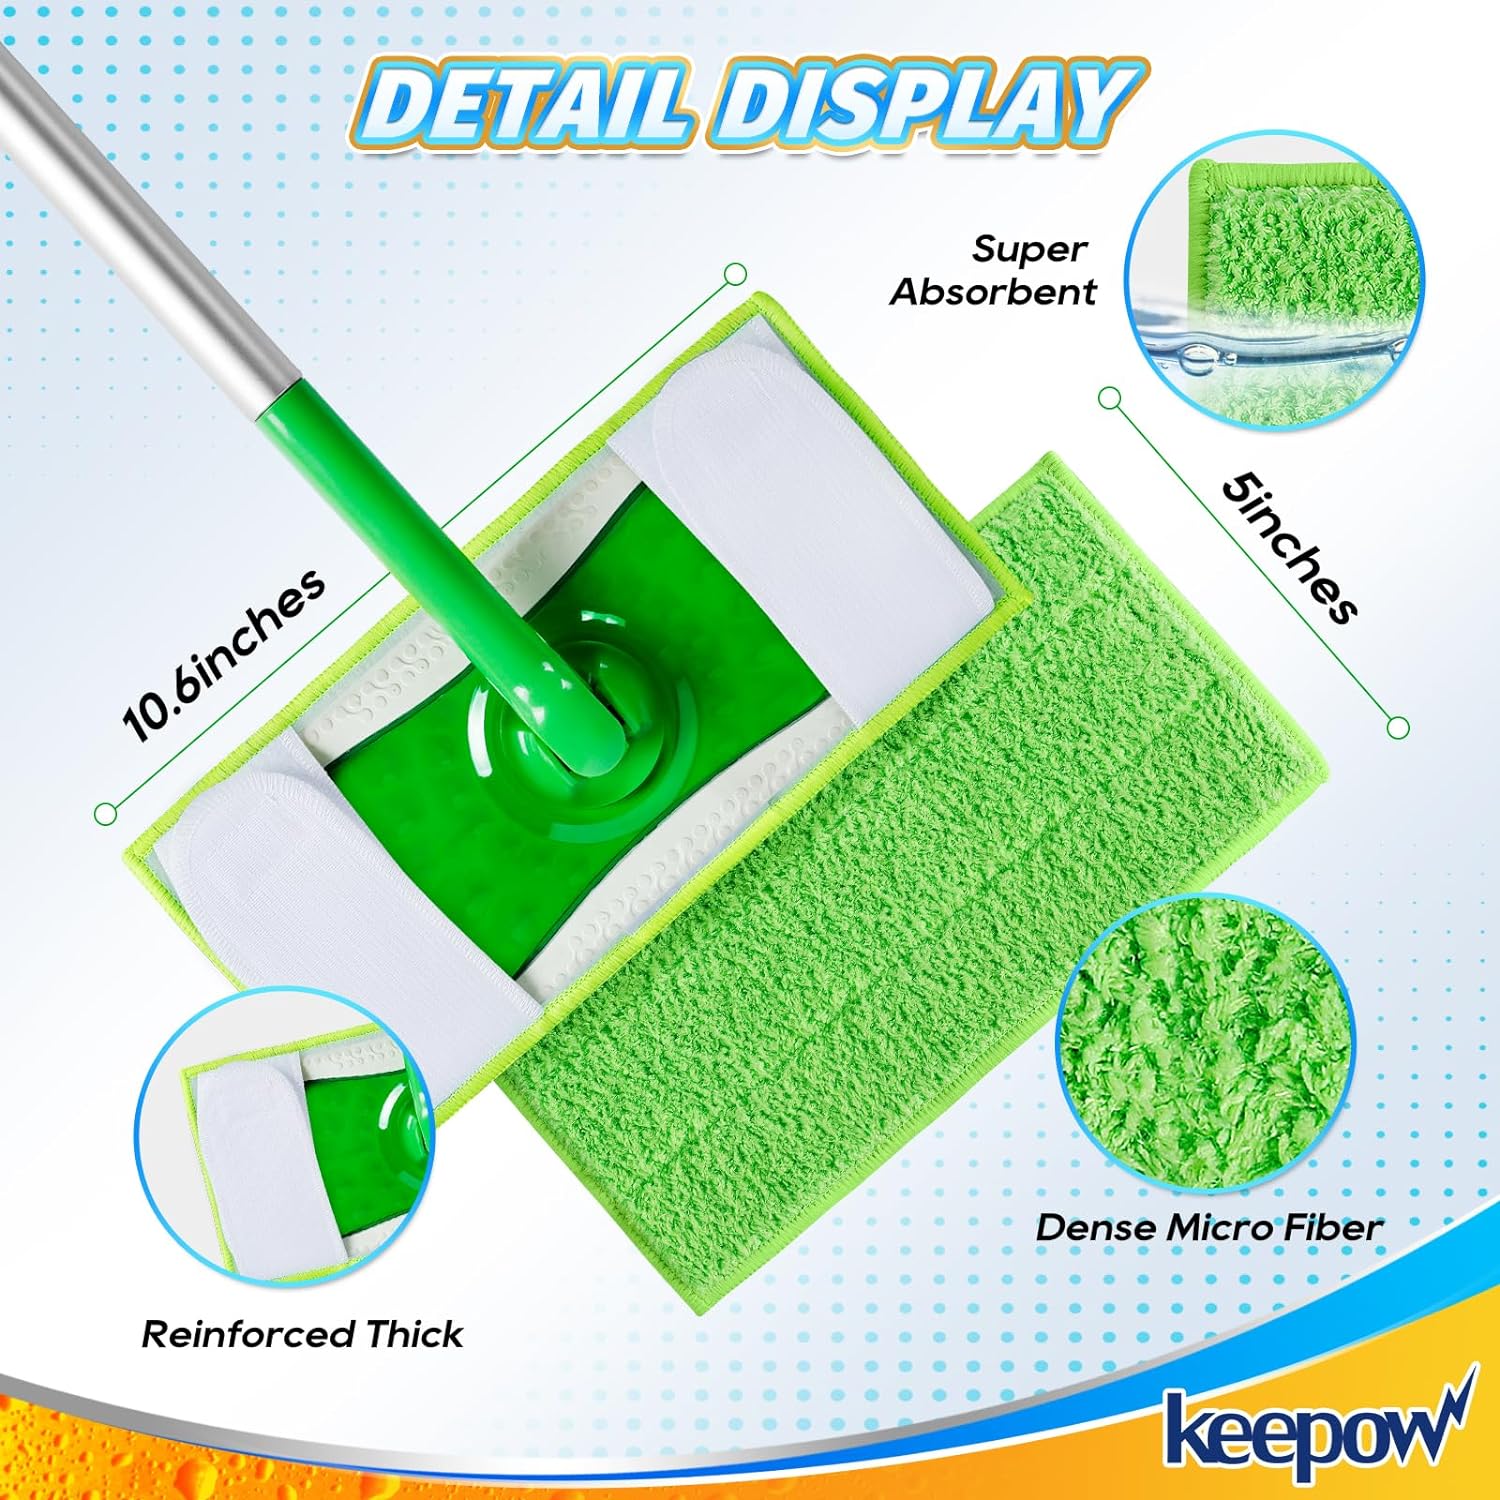 KEEPOW 5701M Dry Sweeping Cloths for Swiffer Sweeper, Reusable Microfiber Mop Pads Refills 2-Pack